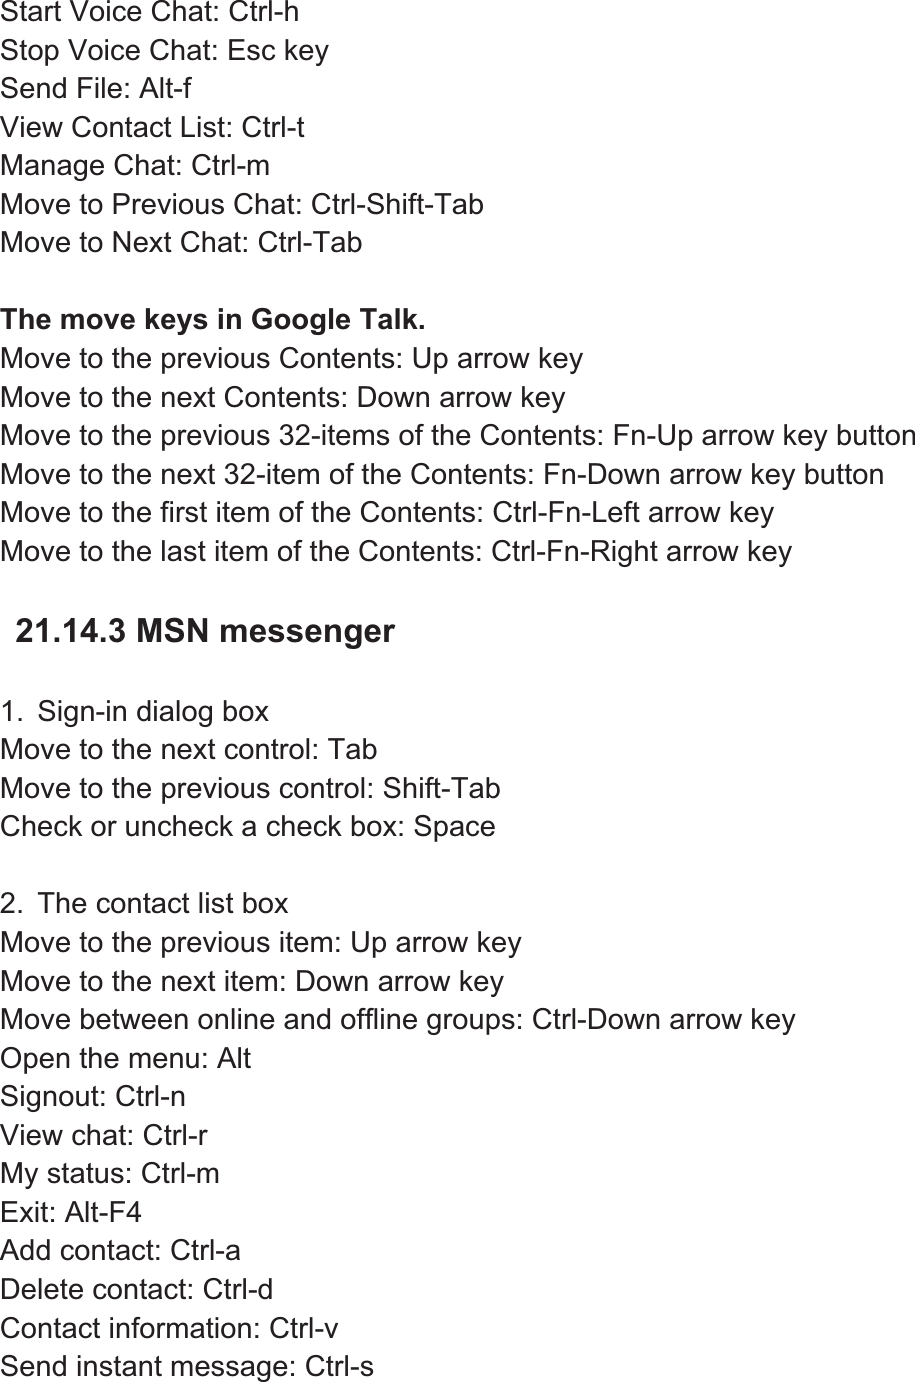 Start Voice Chat: Ctrl-h   Stop Voice Chat: Esc key Send File: Alt-f   View Contact List: Ctrl-t   Manage Chat: Ctrl-m Move to Previous Chat: Ctrl-Shift-Tab Move to Next Chat: Ctrl-Tab The move keys in Google Talk. Move to the previous Contents: Up arrow key   Move to the next Contents: Down arrow key Move to the previous 32-items of the Contents: Fn-Up arrow key button Move to the next 32-item of the Contents: Fn-Down arrow key button Move to the first item of the Contents: Ctrl-Fn-Left arrow key Move to the last item of the Contents: Ctrl-Fn-Right arrow key 21.14.3 MSN messenger 1.  Sign-in dialog box Move to the next control: Tab Move to the previous control: Shift-Tab Check or uncheck a check box: Space 2.  The contact list box Move to the previous item: Up arrow key Move to the next item: Down arrow key Move between online and offline groups: Ctrl-Down arrow key Open the menu: Alt Signout: Ctrl-n View chat: Ctrl-r My status: Ctrl-m Exit: Alt-F4 Add contact: Ctrl-a Delete contact: Ctrl-d Contact information: Ctrl-v Send instant message: Ctrl-s 